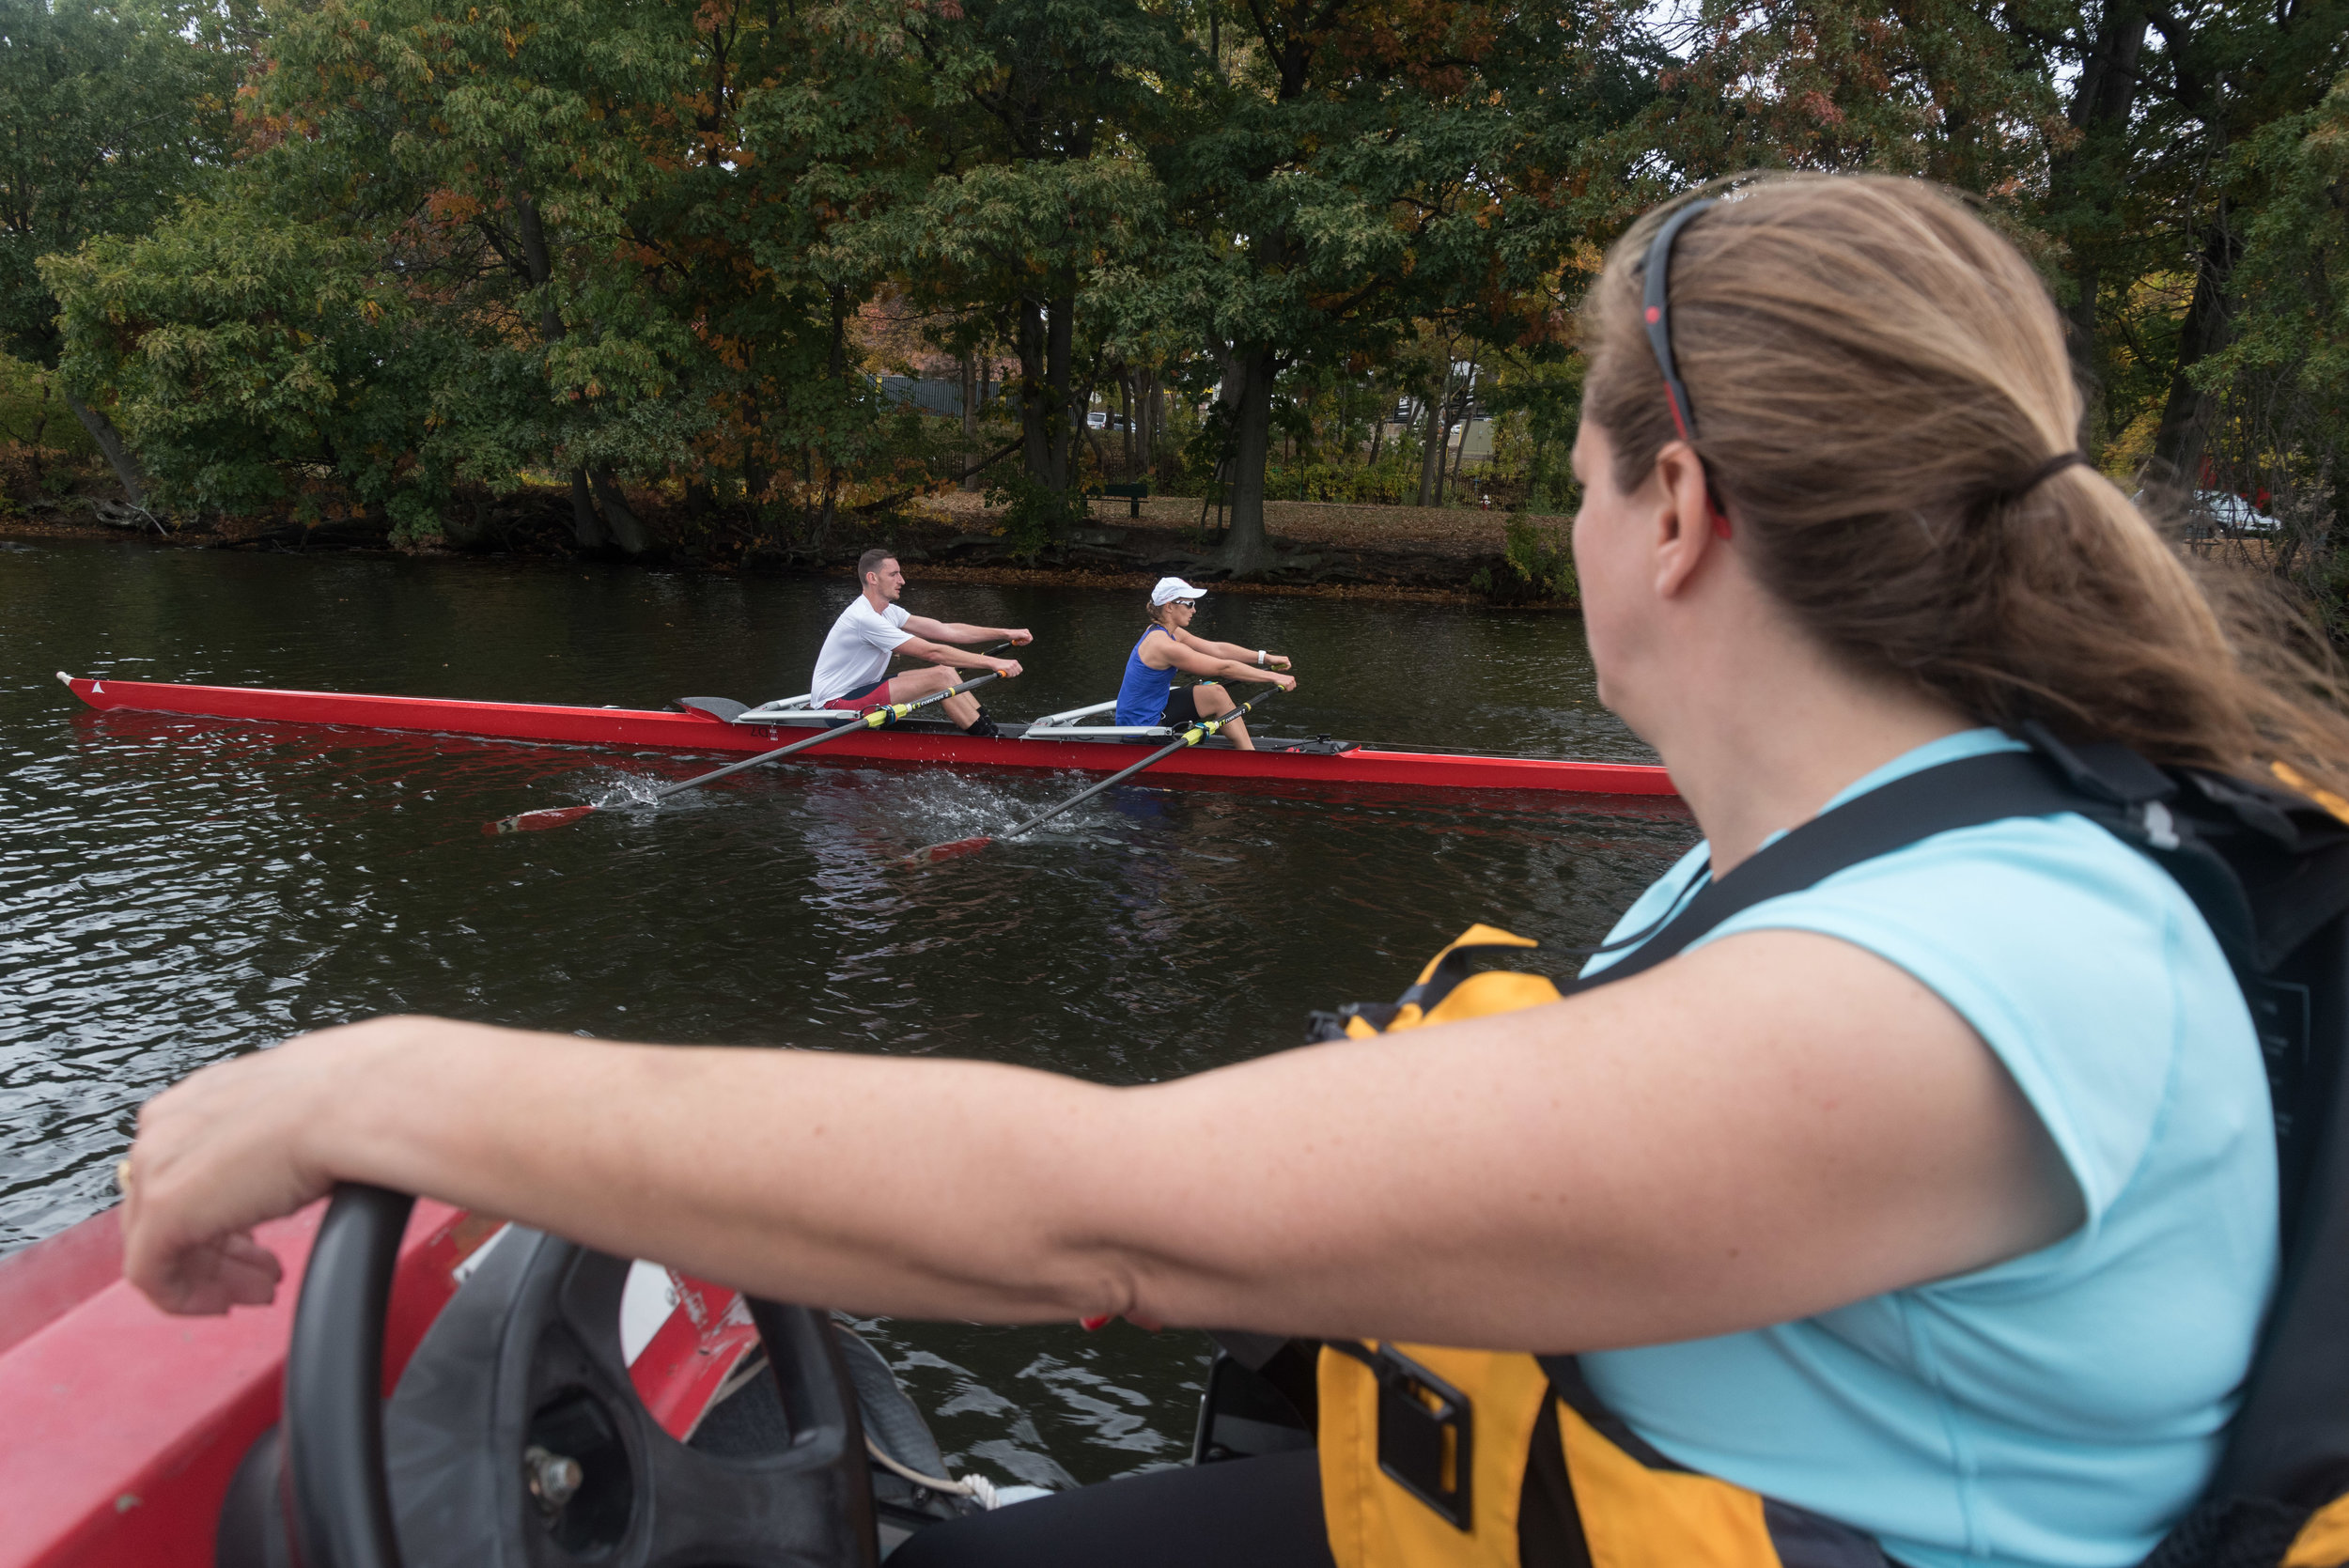  Beth Noll, right, coaches Matt Wheeler and para-rower Johanna Beyer during their practice on Friday, Oct. 21 on the Charles River. Noll said that when Beyer competed in the 2015 regatta, she was noticed by the Austrian national team, her home countr